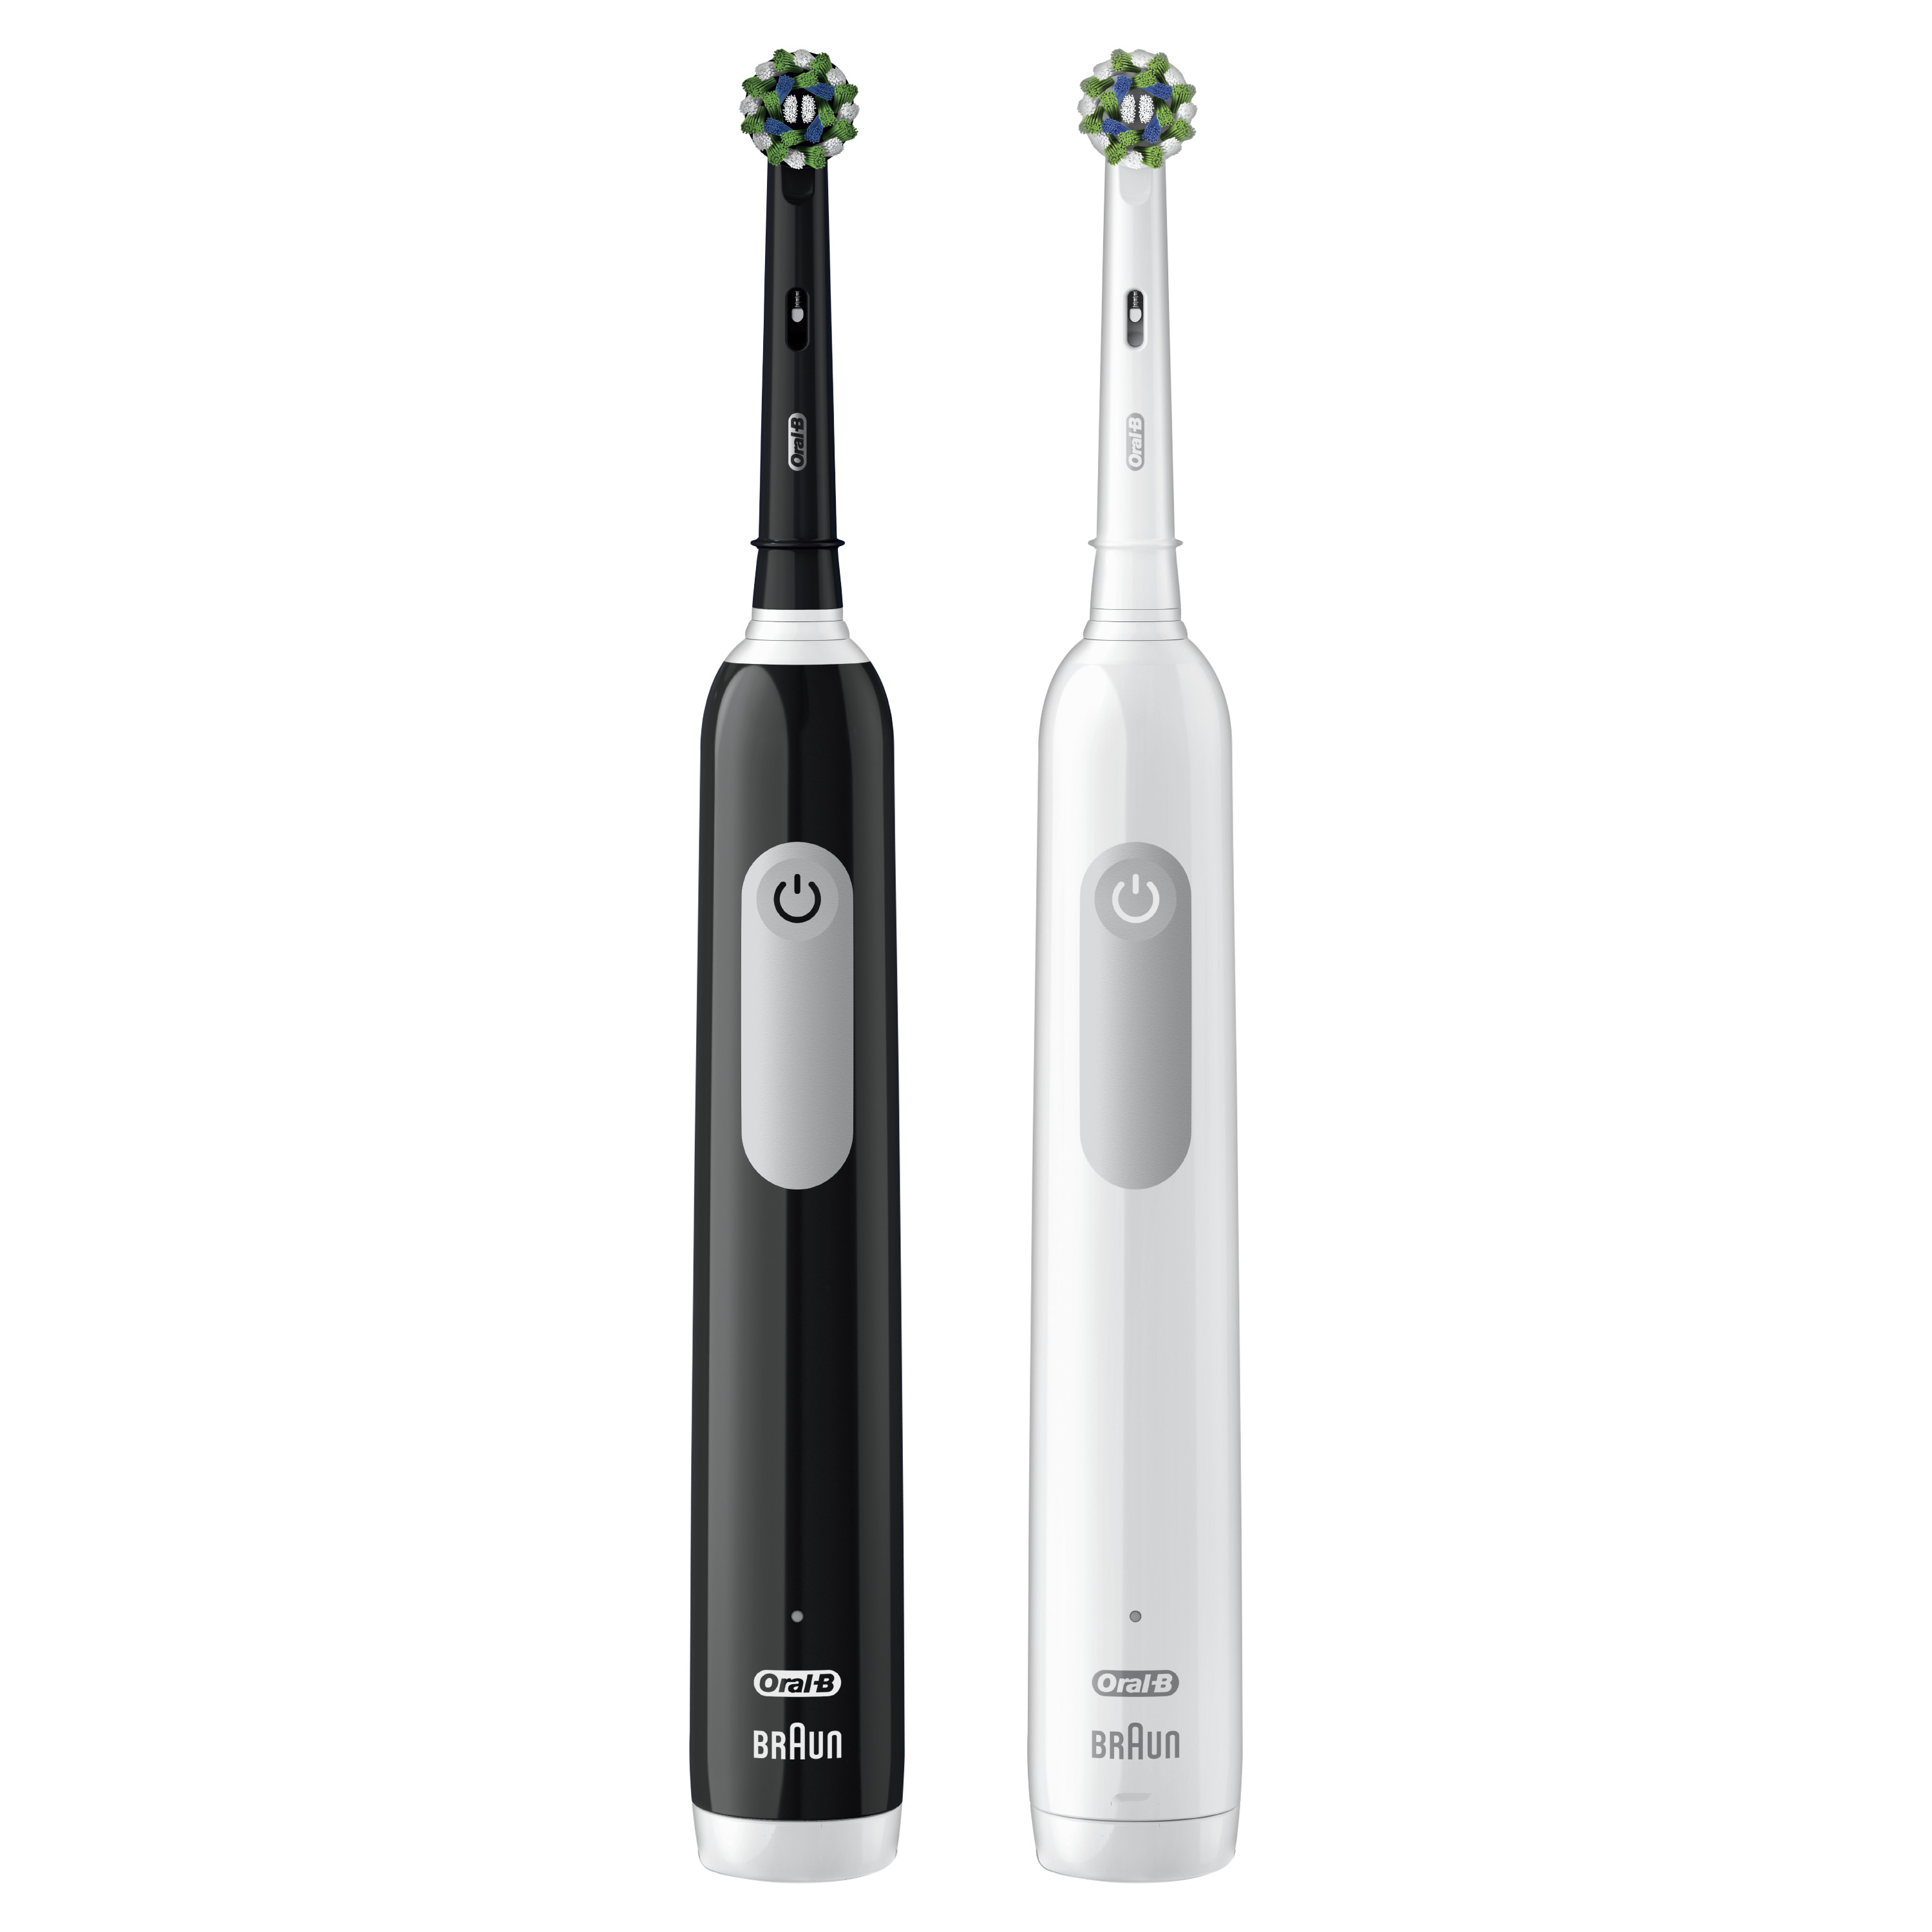 Oral-B Pro 1000 CrossAction Electric Toothbrush, Powered by Braun, Black and White, Pack of 2 - image 2 of 7